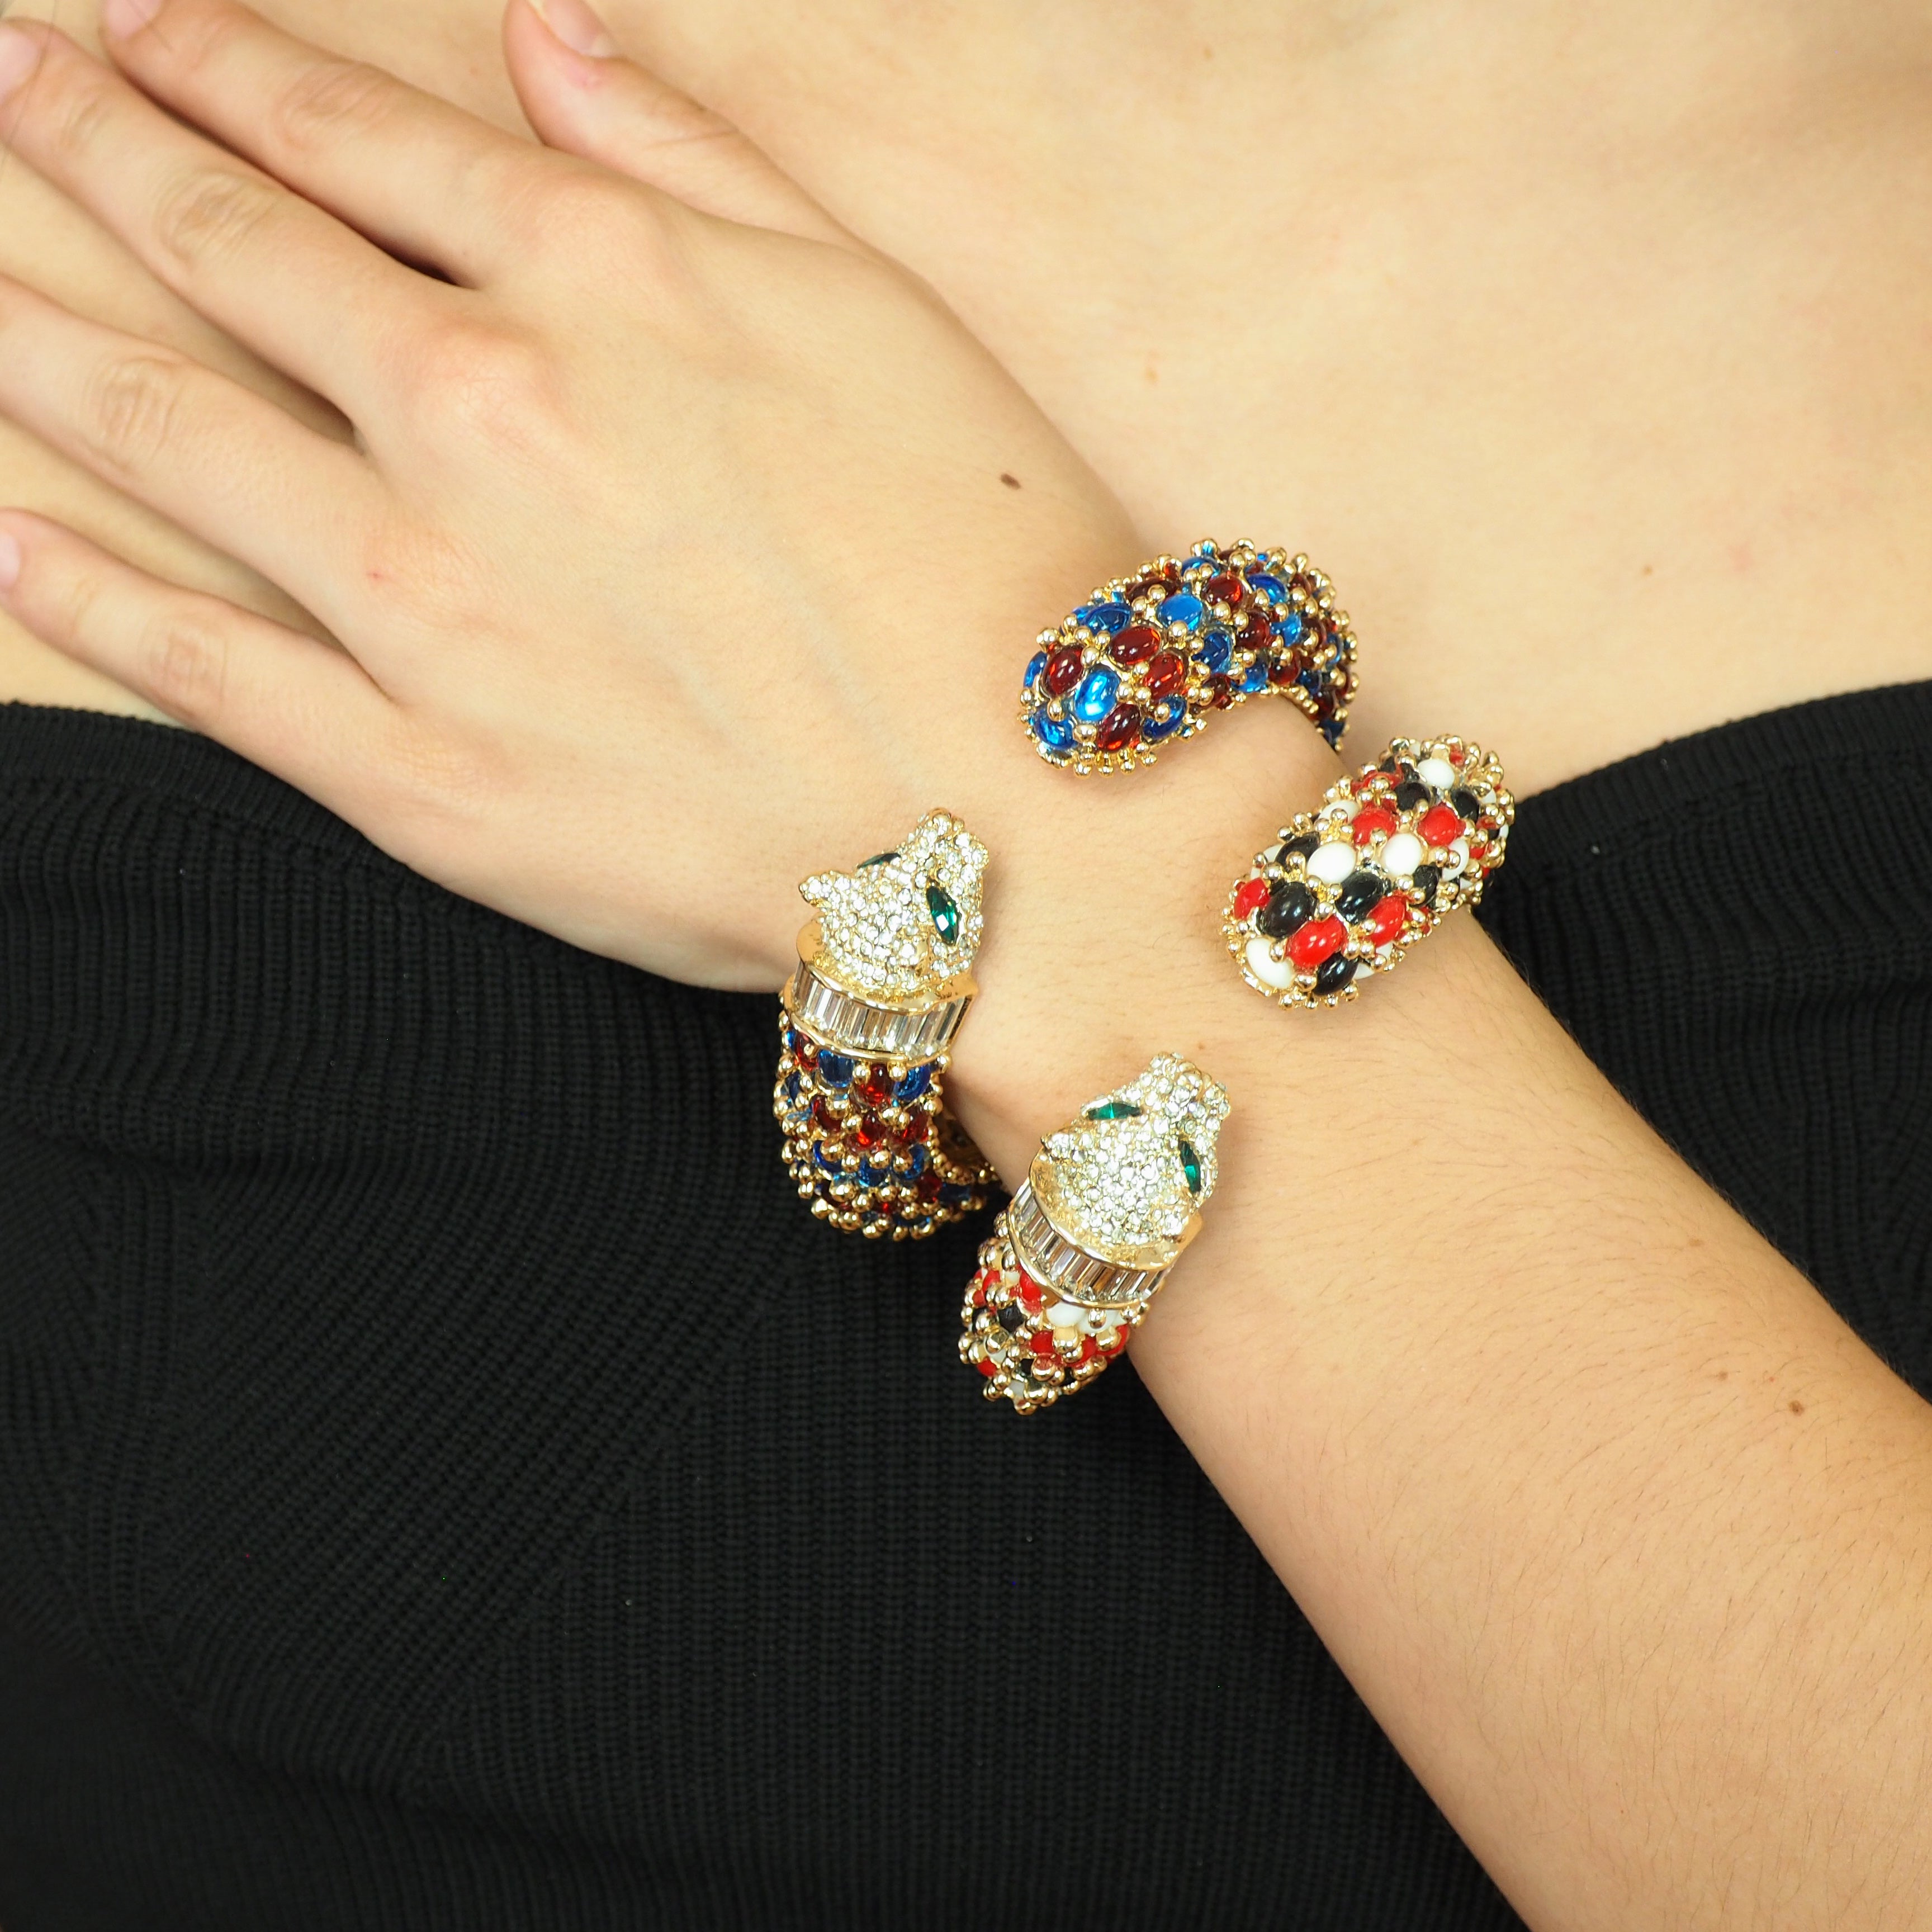 The Tiger Bangle - Blue and Red